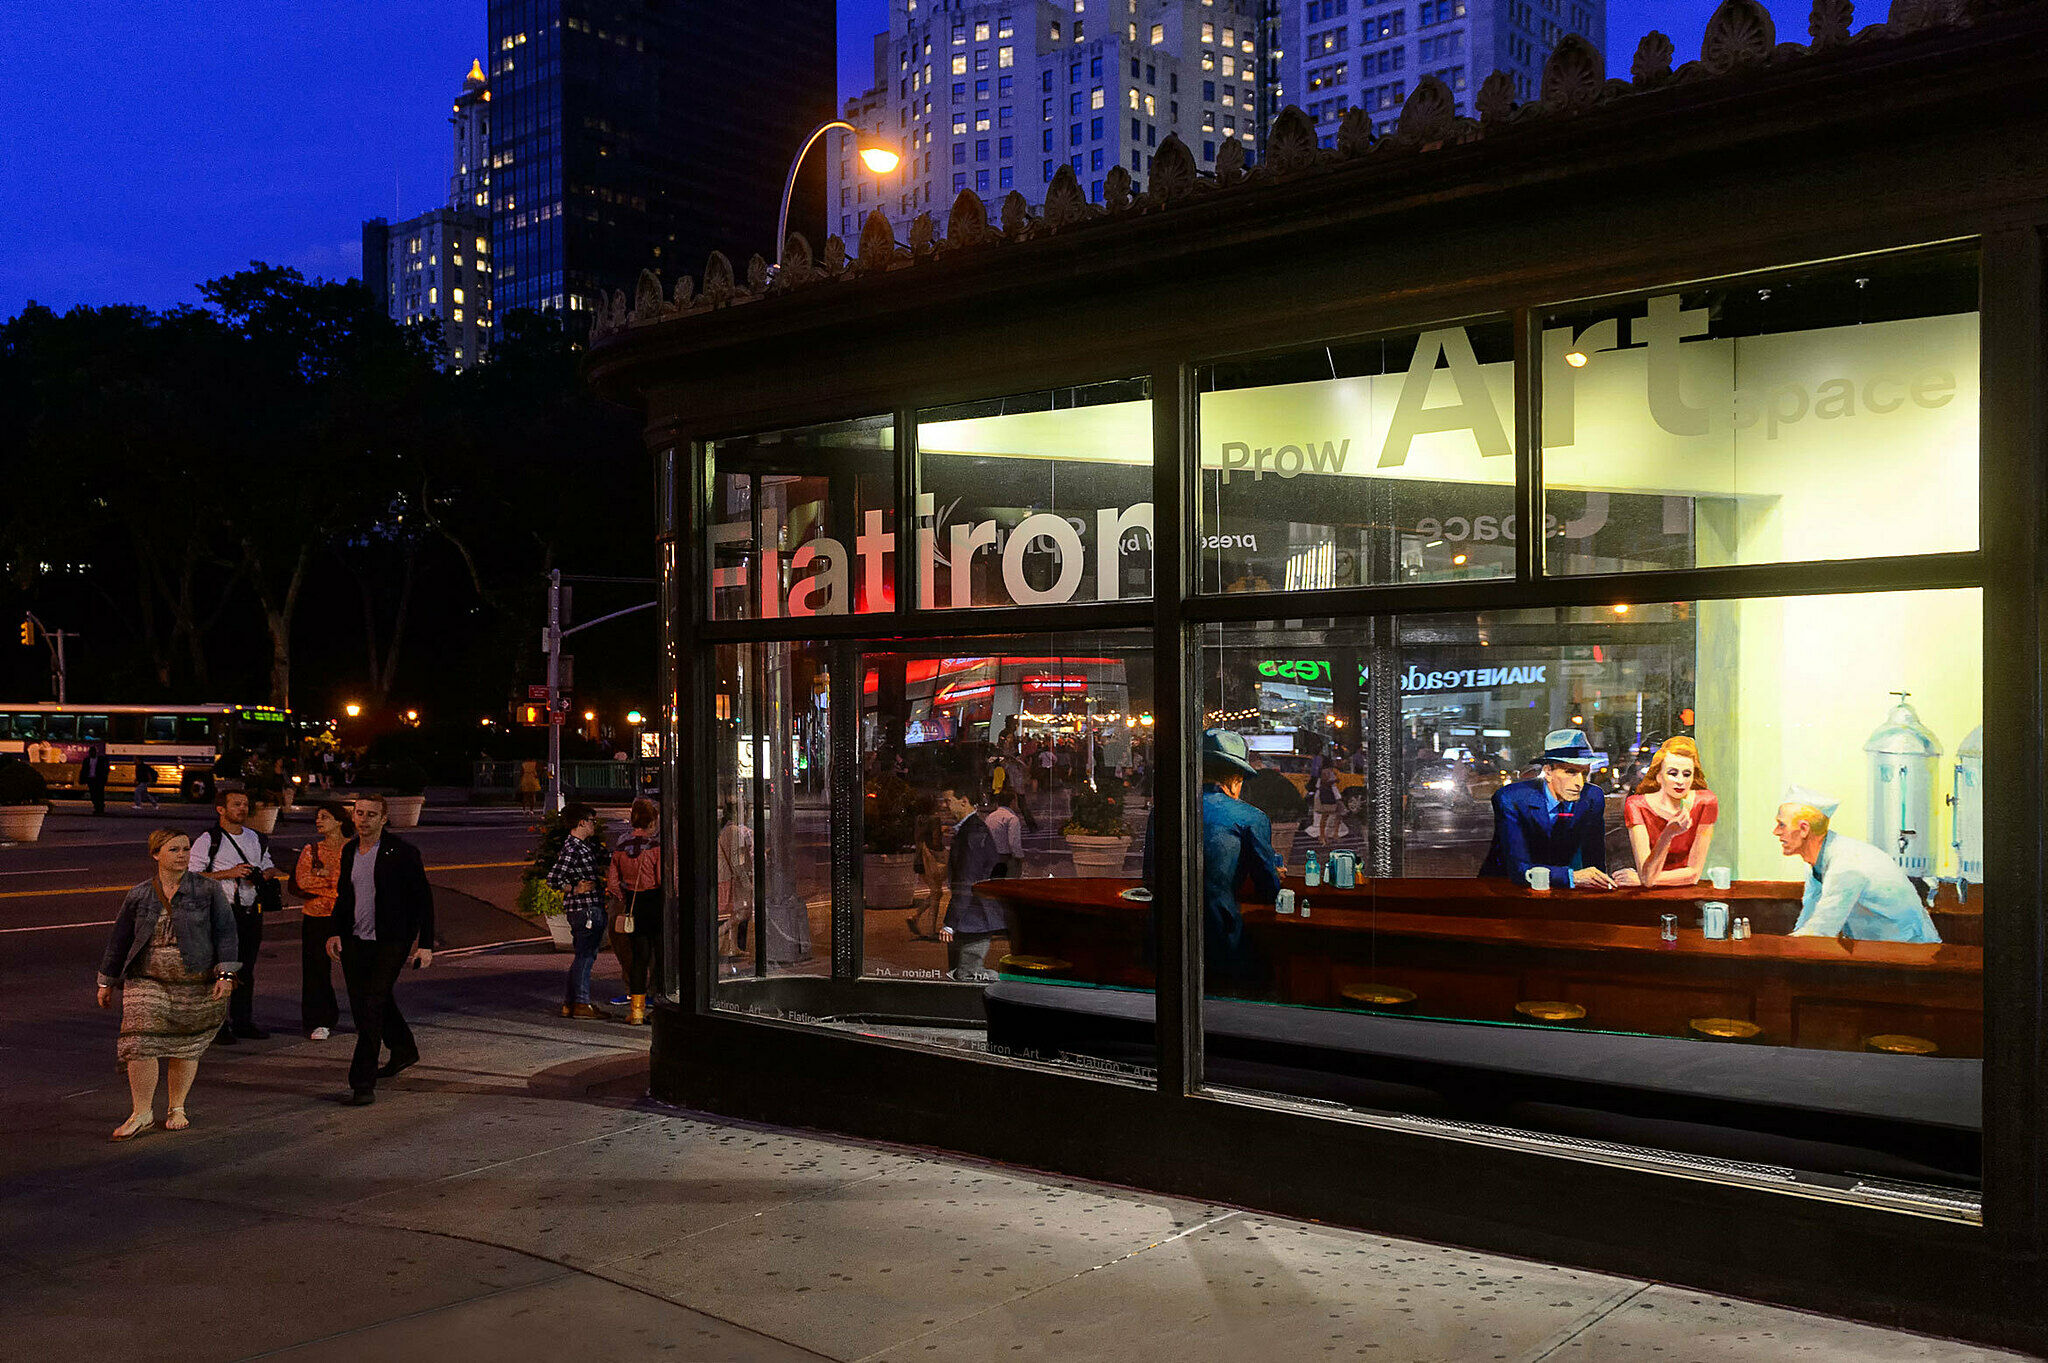 A photo of the Nighthawks installation in the Flatiron building